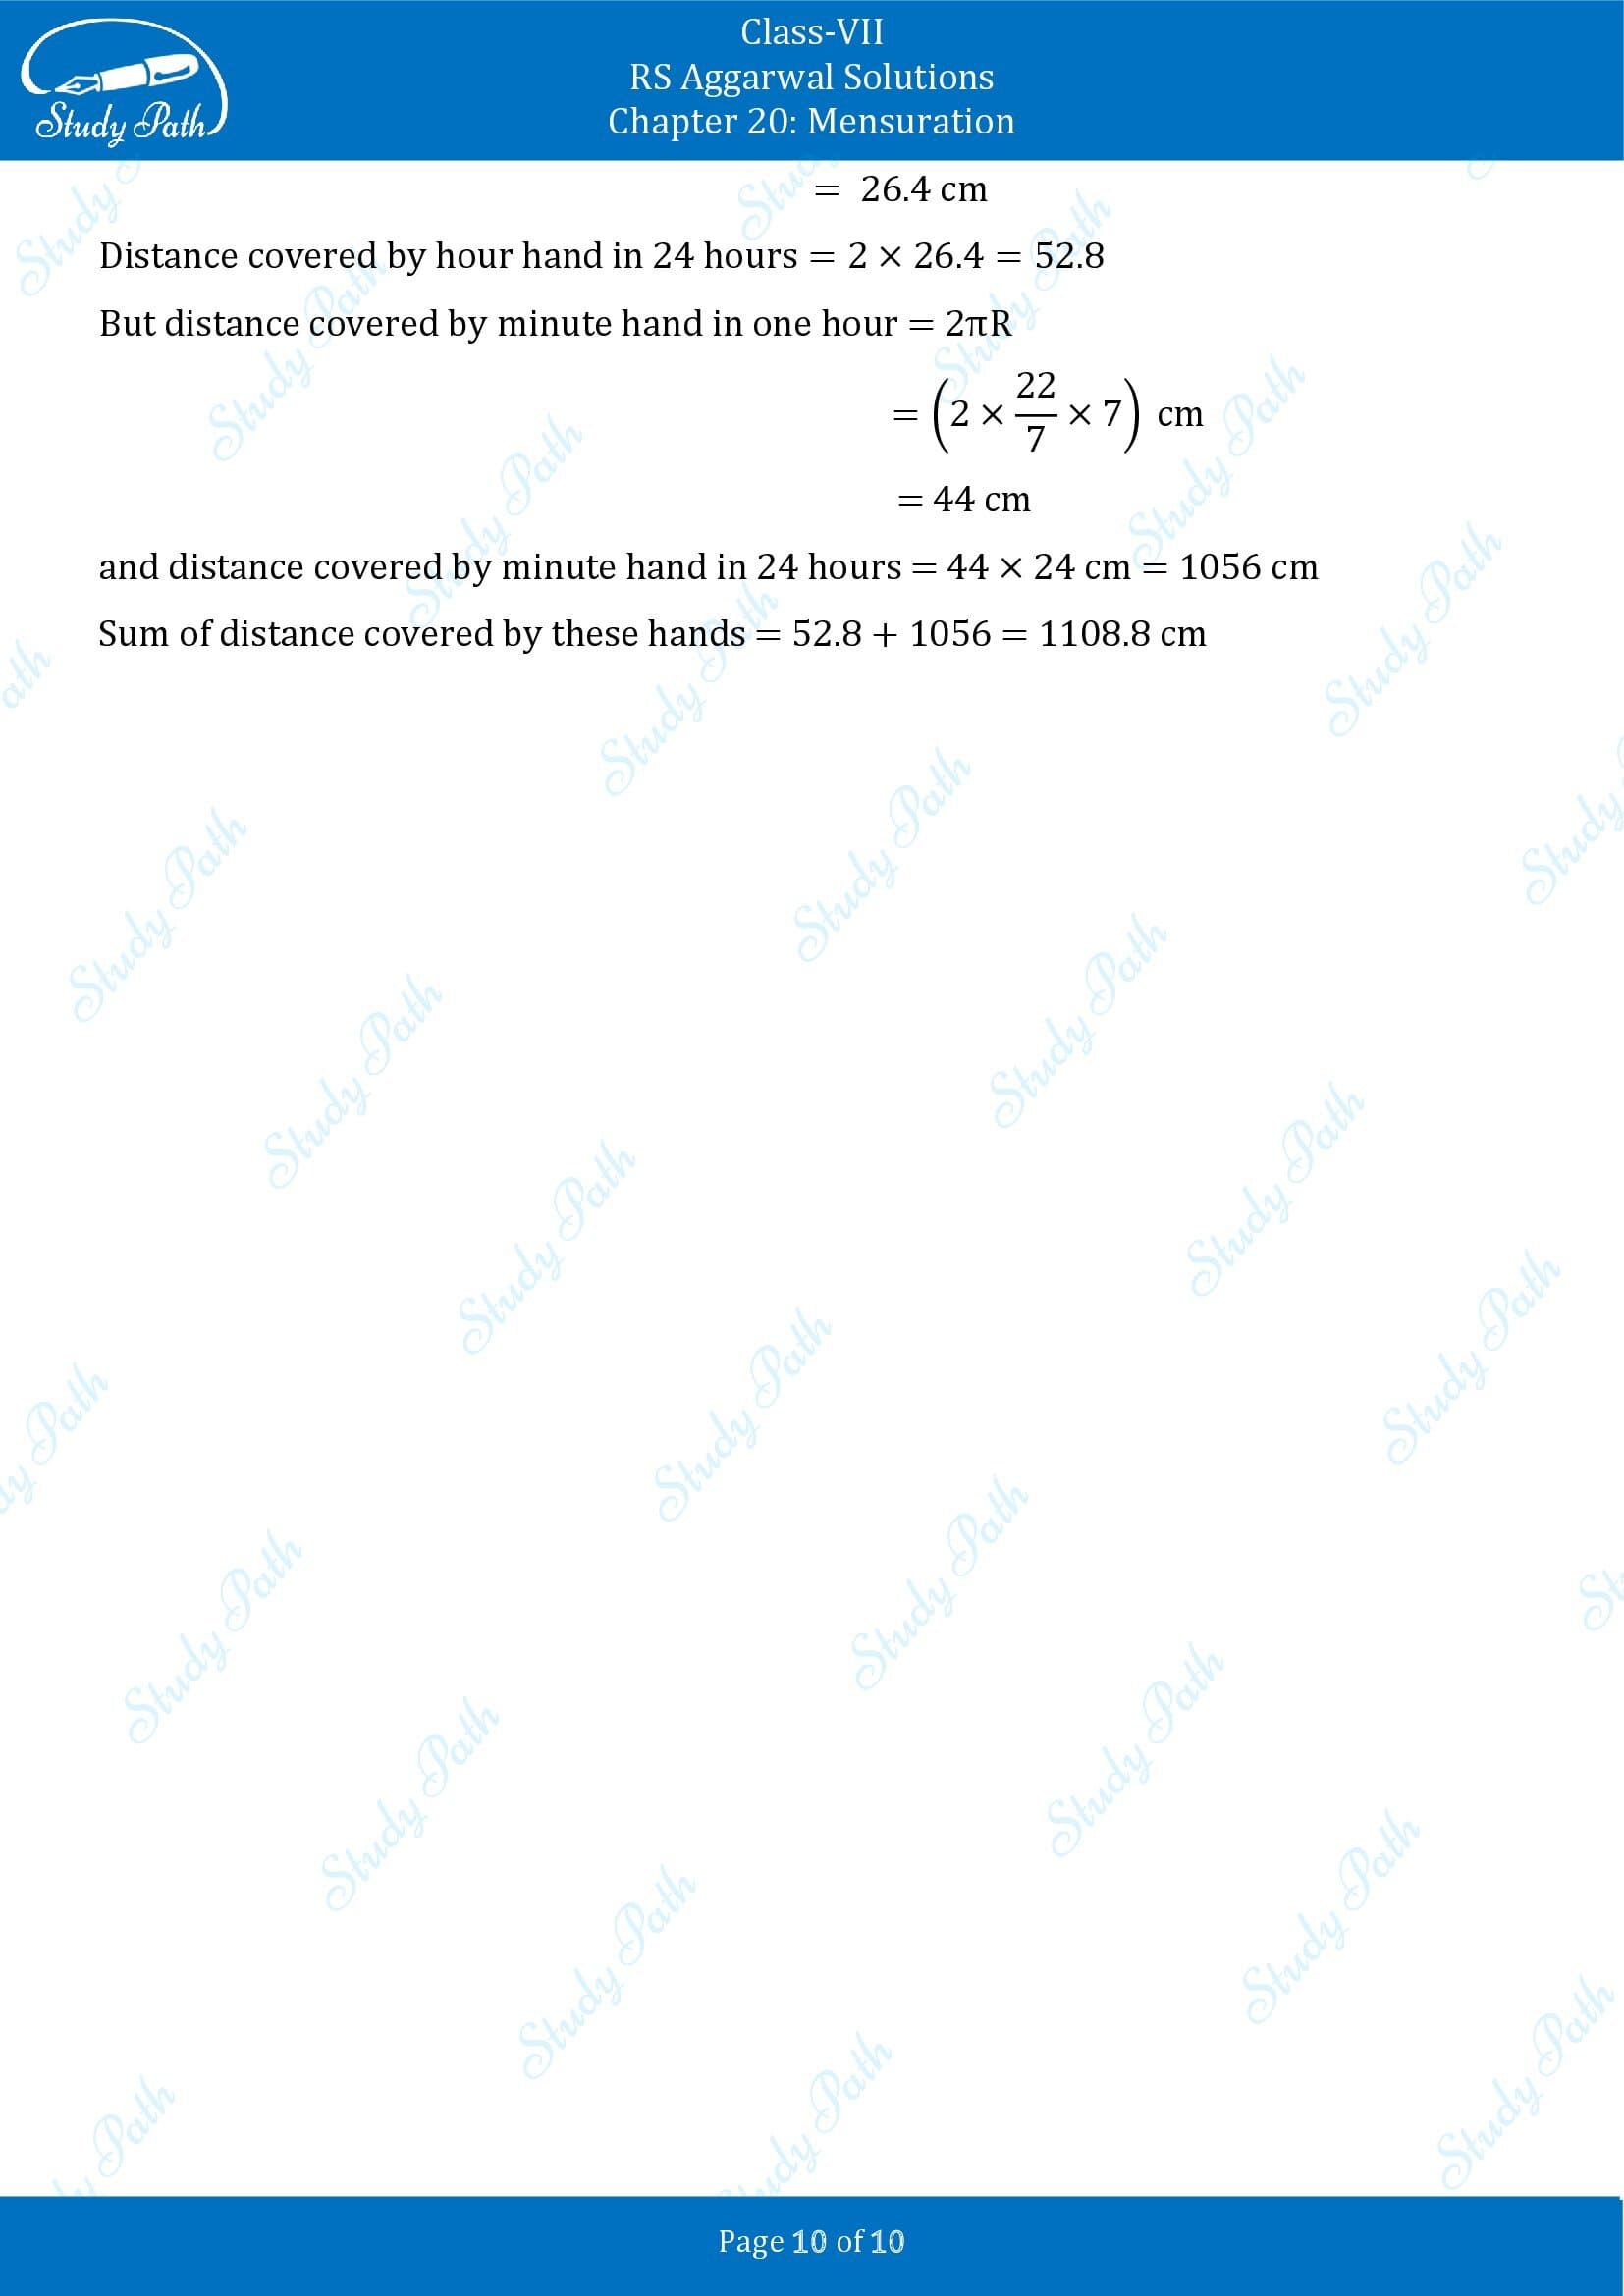 RS Aggarwal Solutions Class 7 Chapter 20 Mensuration Exercise 20E 00010